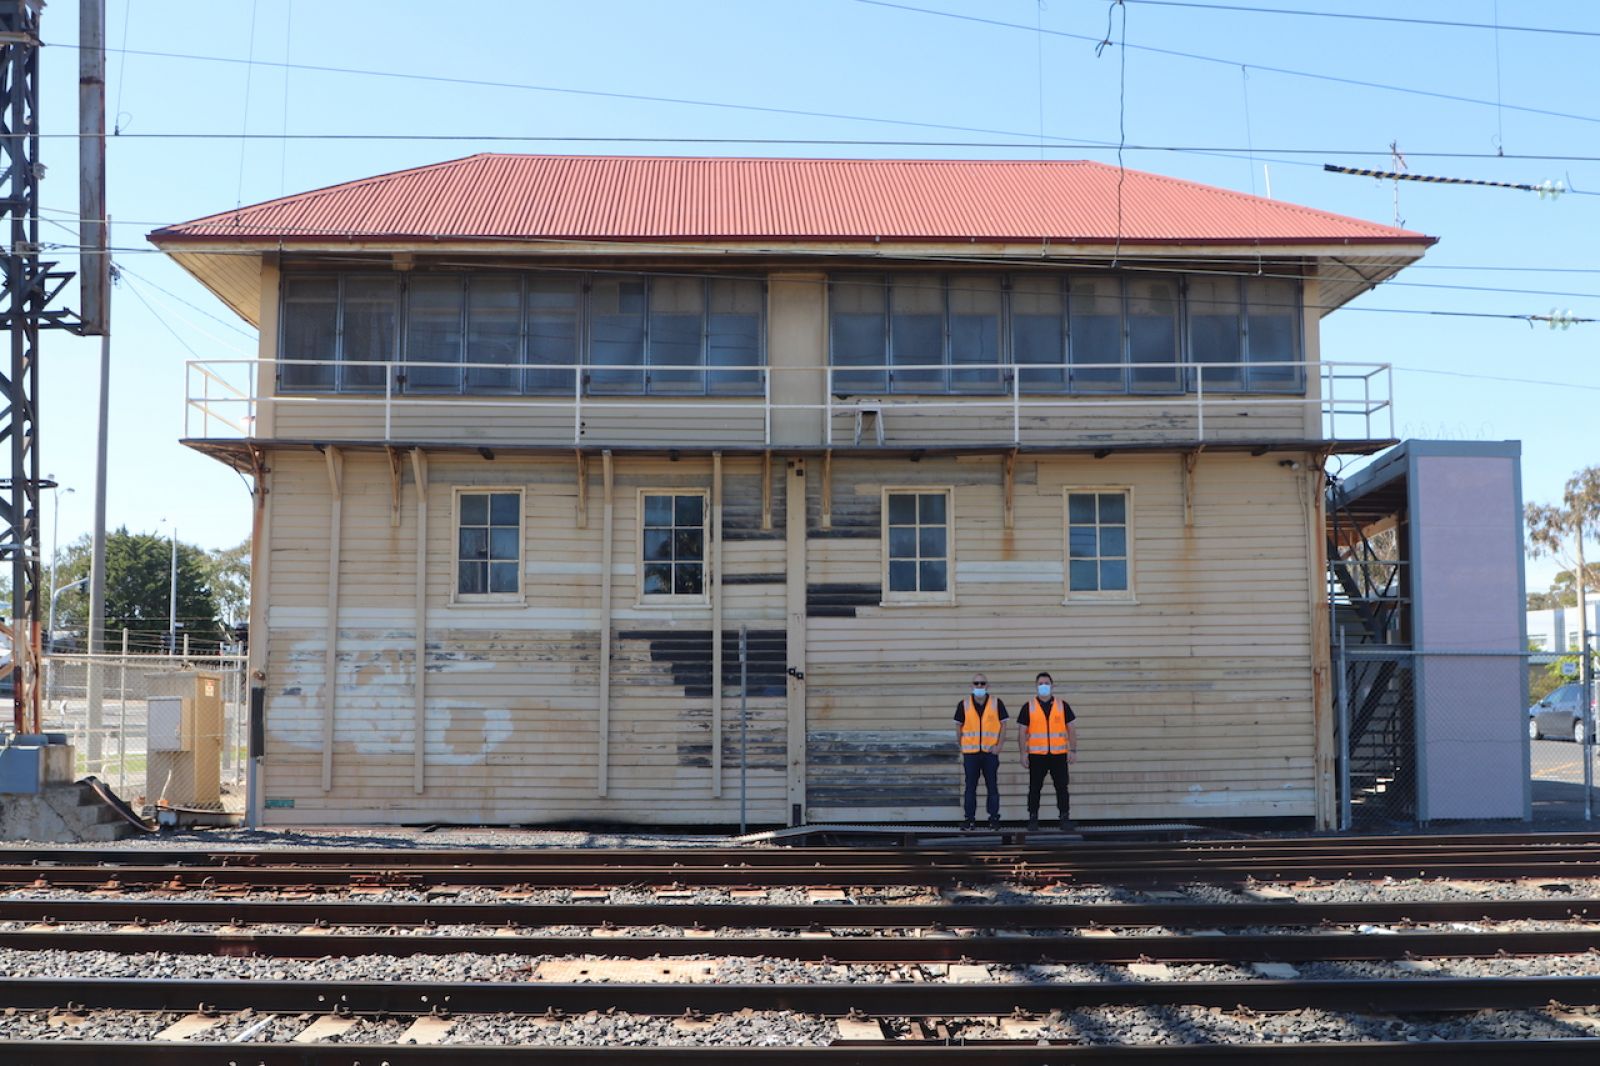 Two workers standing in front of an old weatherboard building near the train lines.